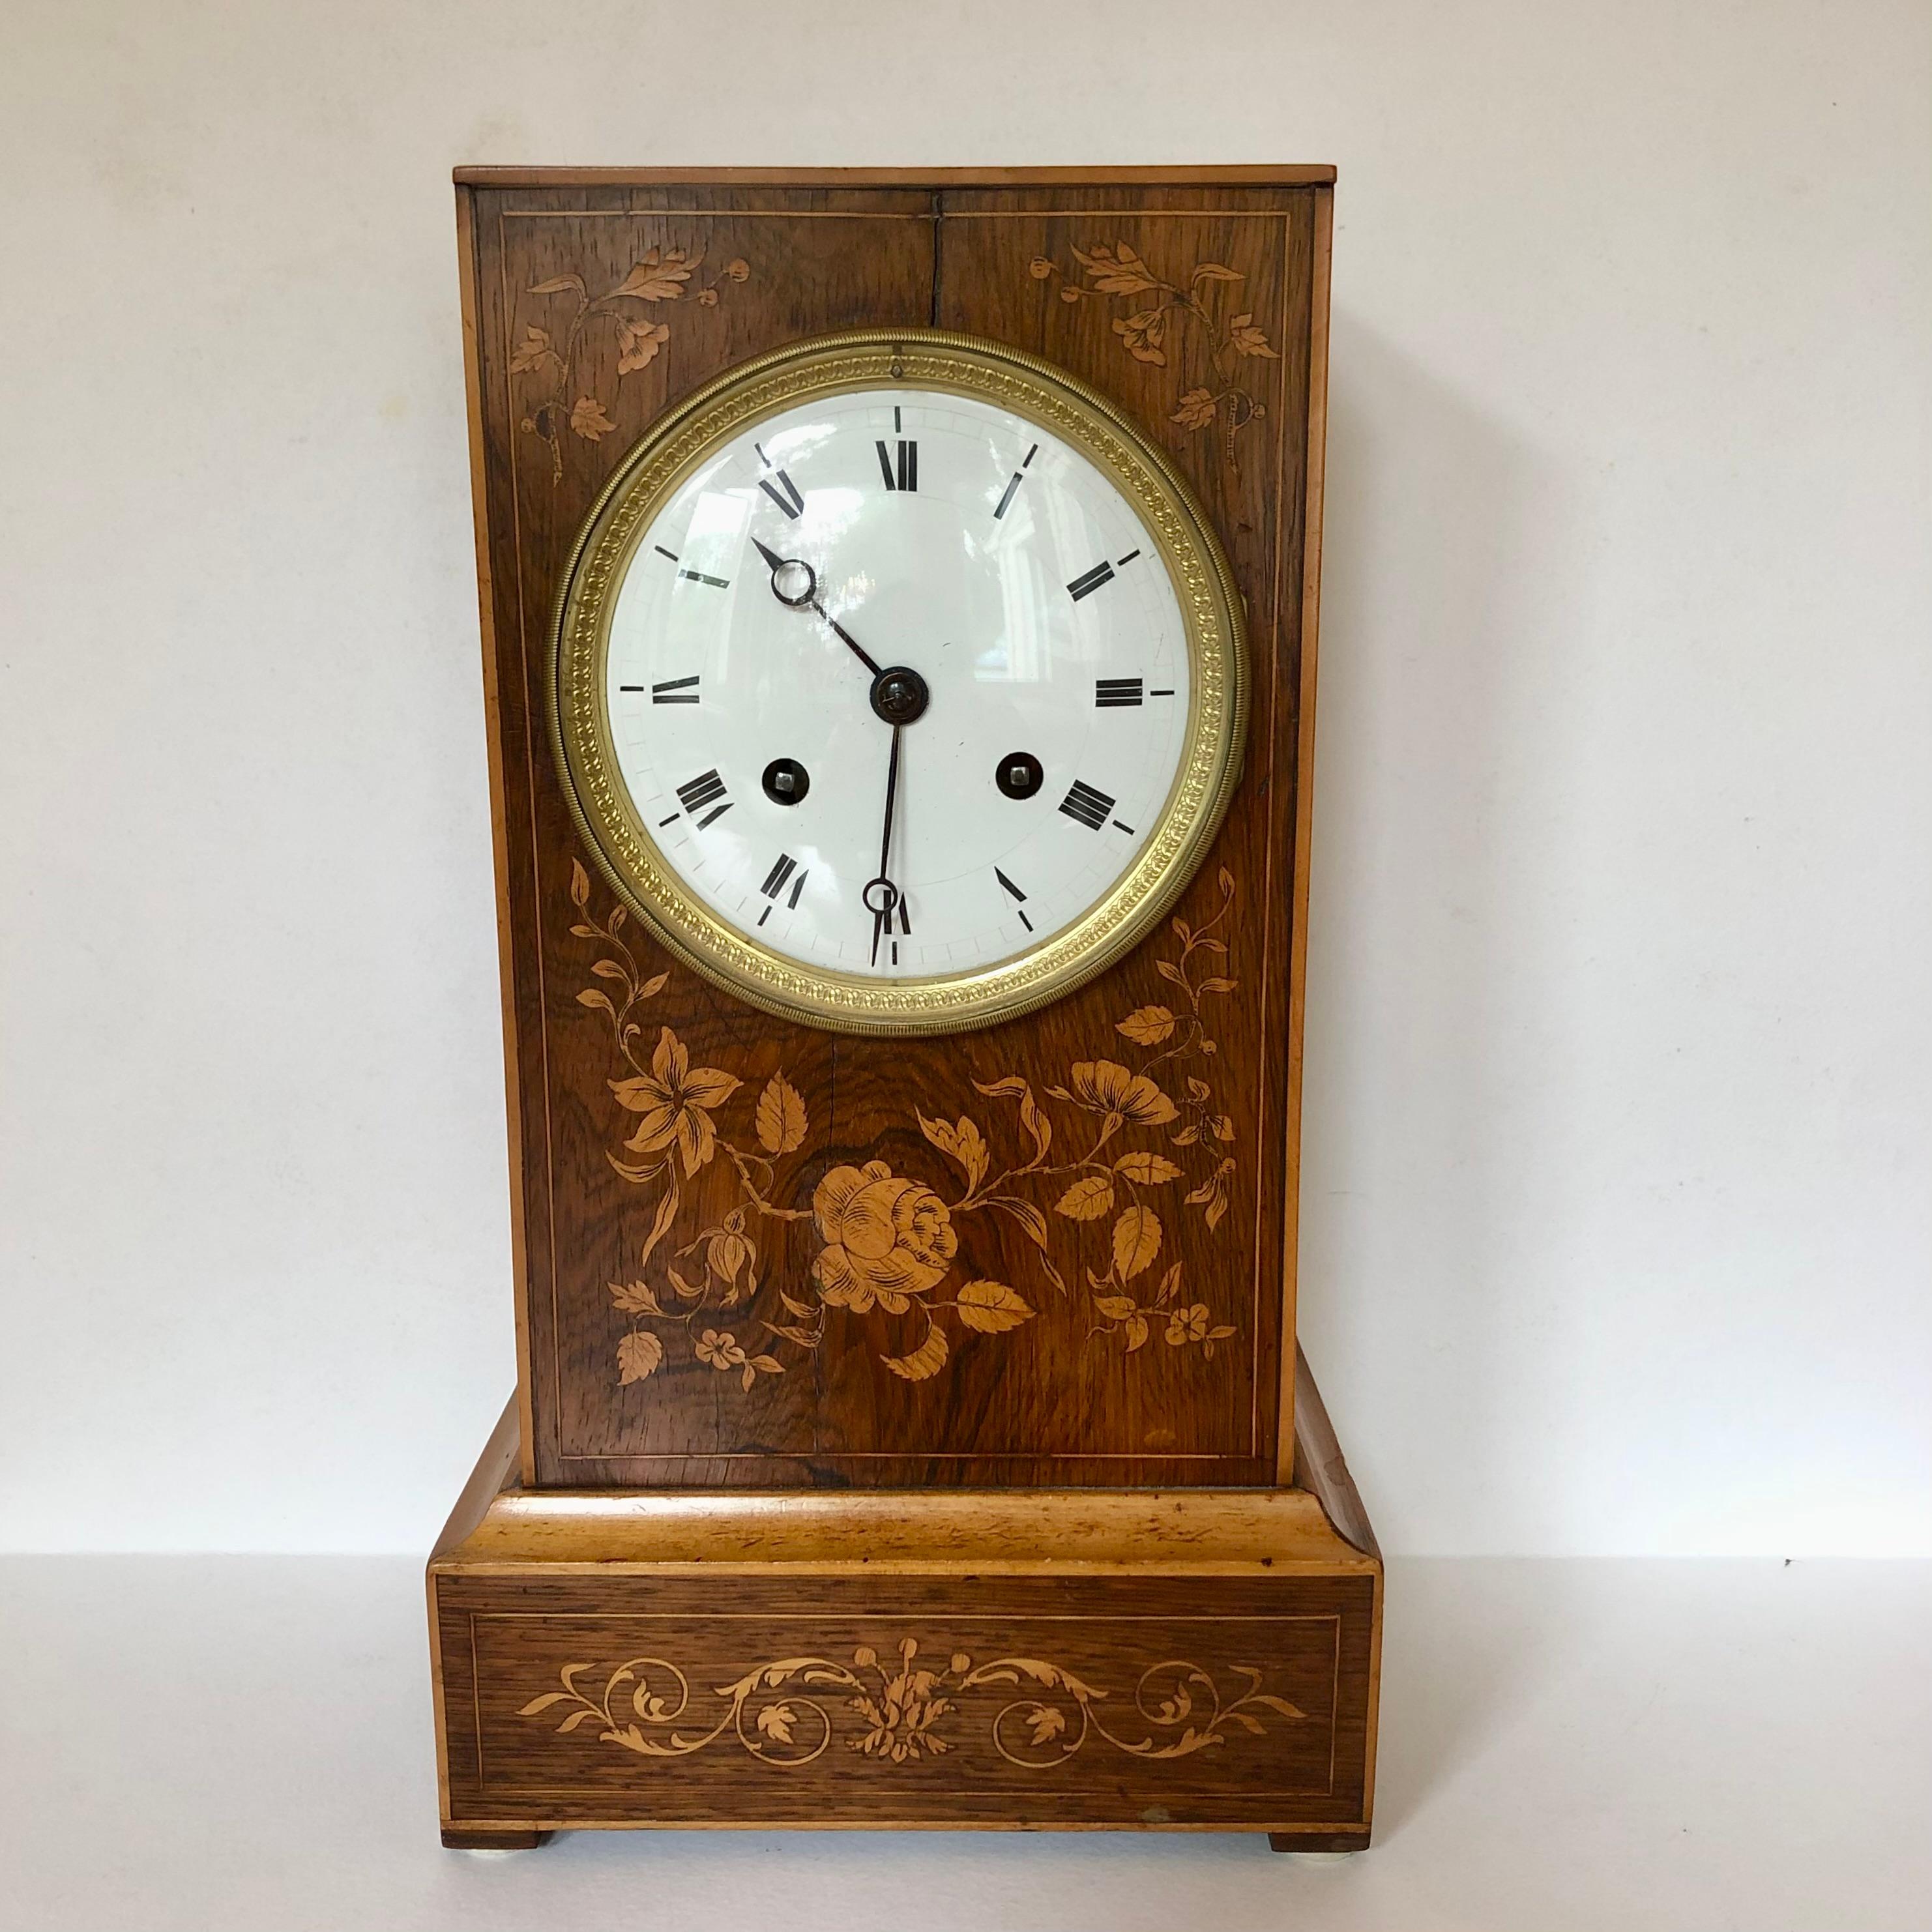 A beautifully made, French, inlaid rosewood mantel clock from 1820, with 8 day striking movement and silk-suspended pendulum. Original porcelain dial mounted in brass. The marquetry features lovely stylized flowers that contrast perfectly with the